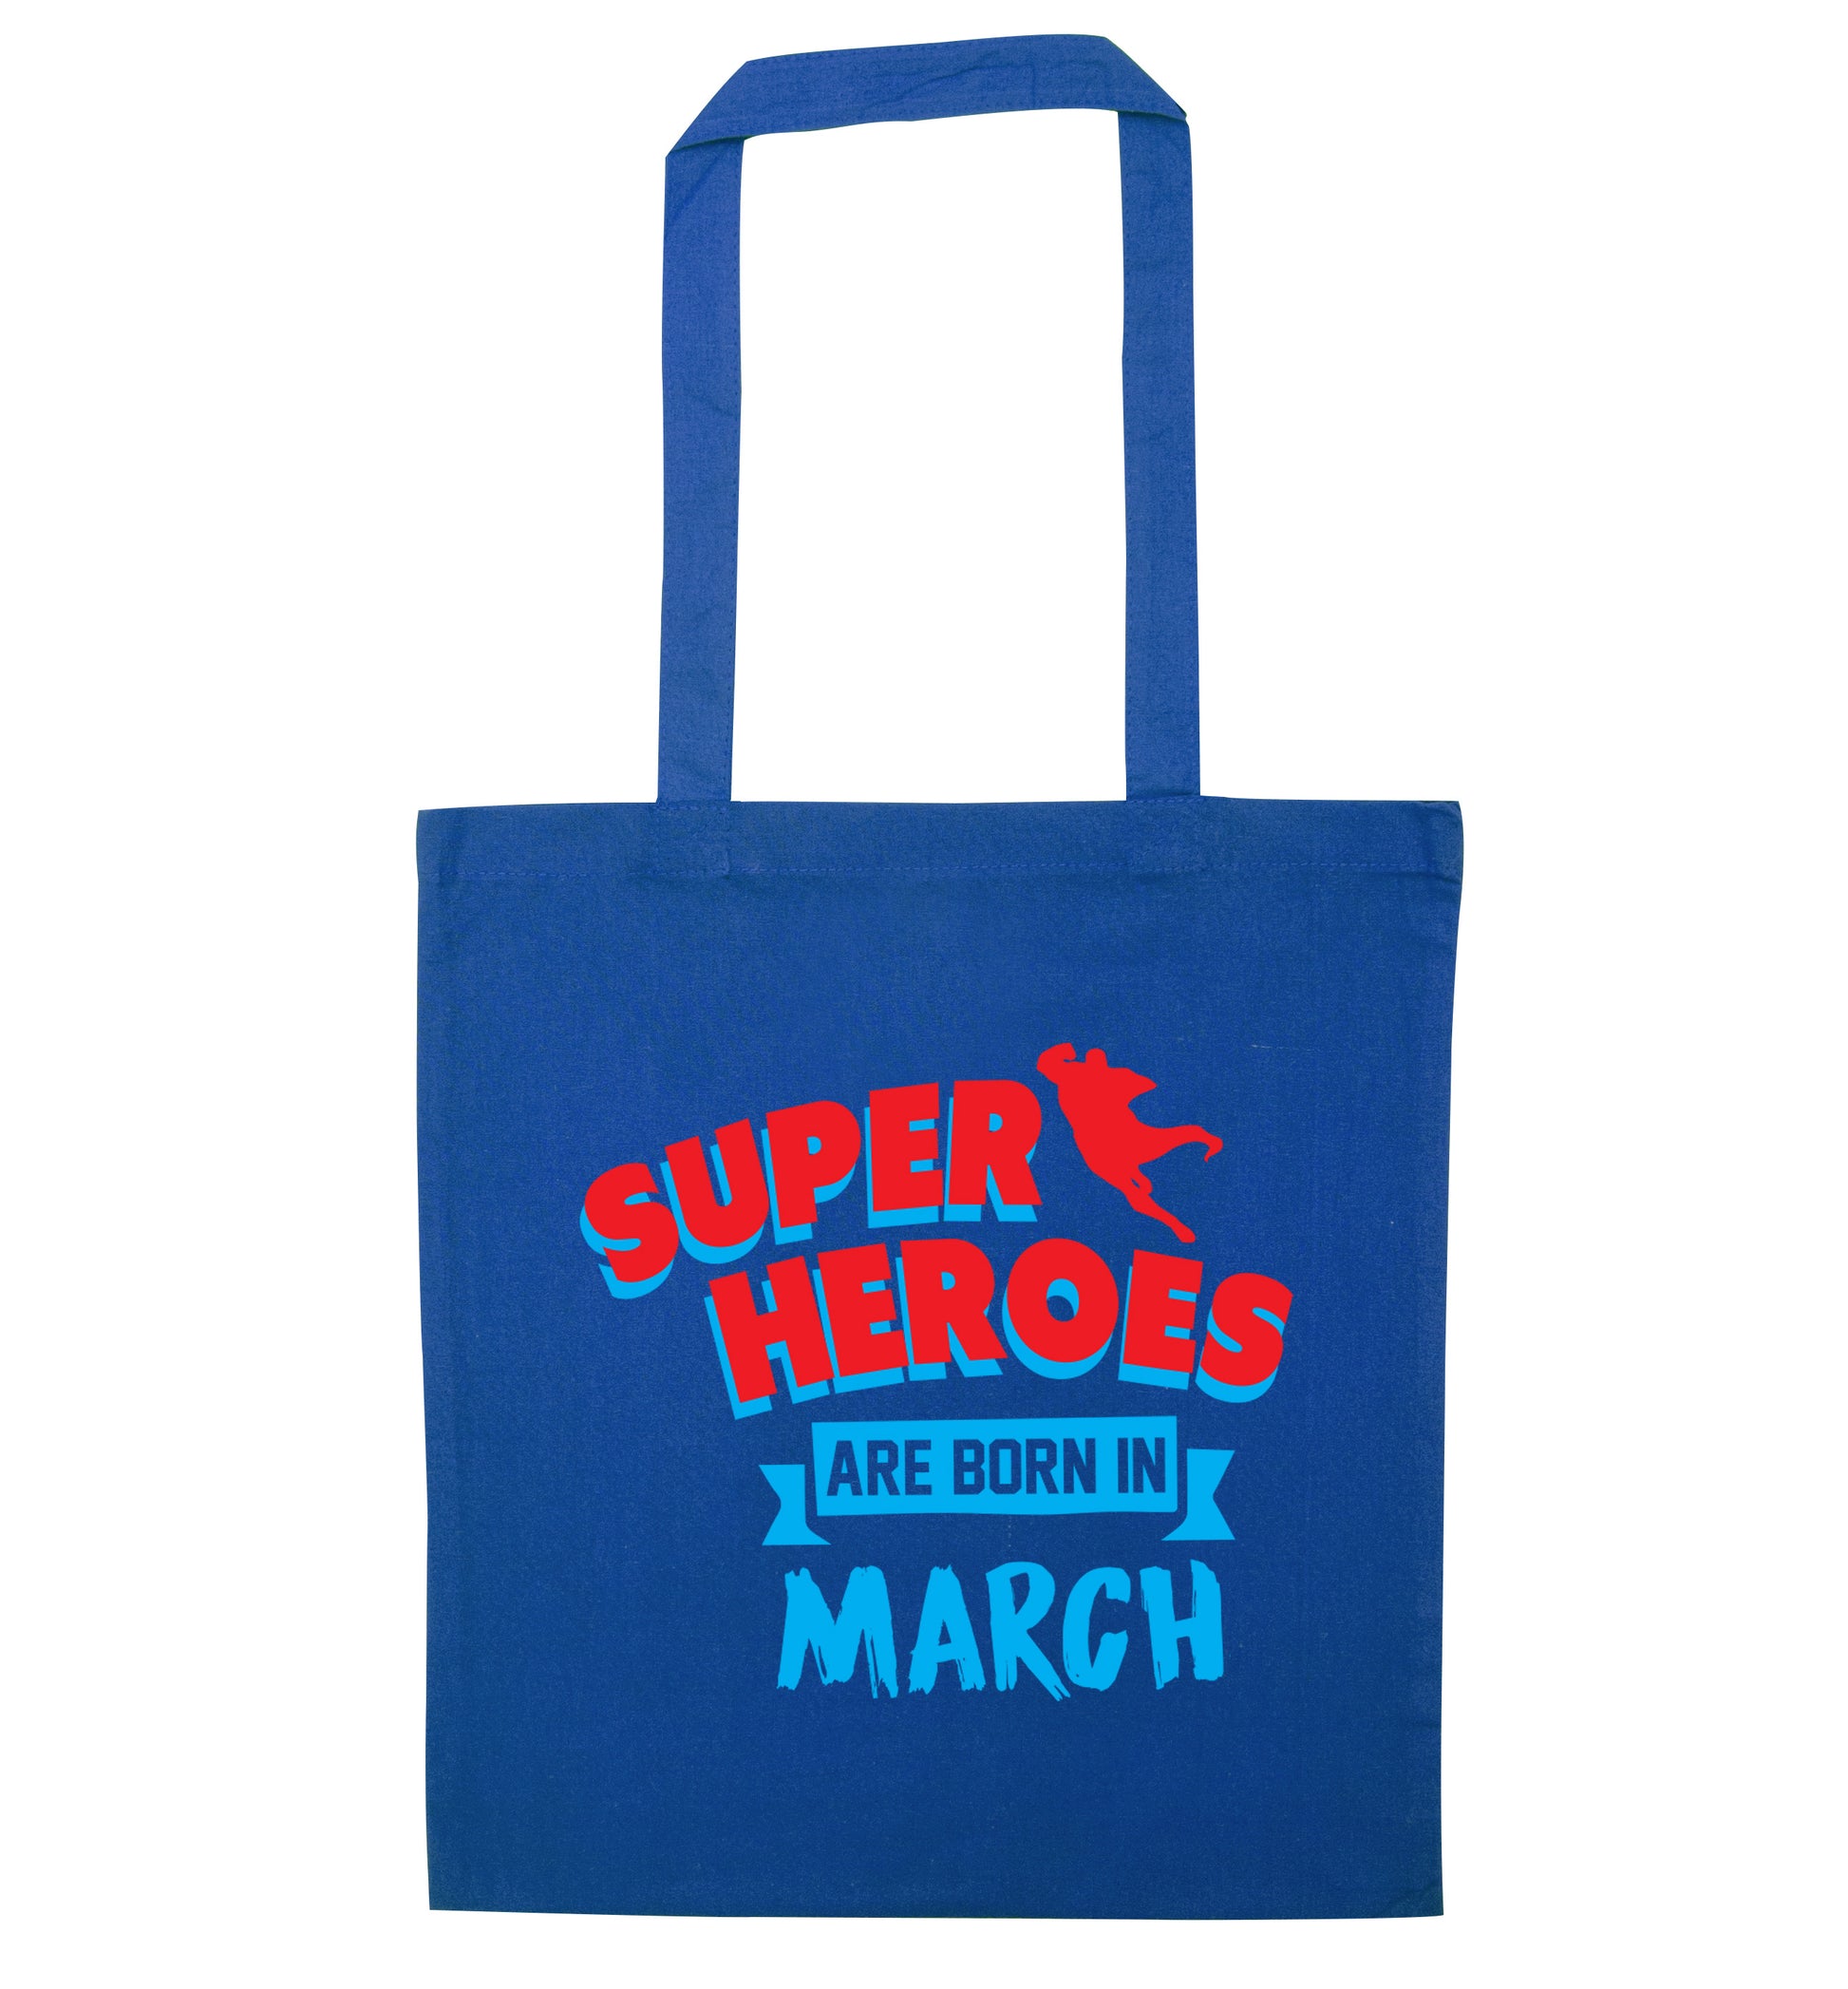 Superheros are born in March blue tote bag